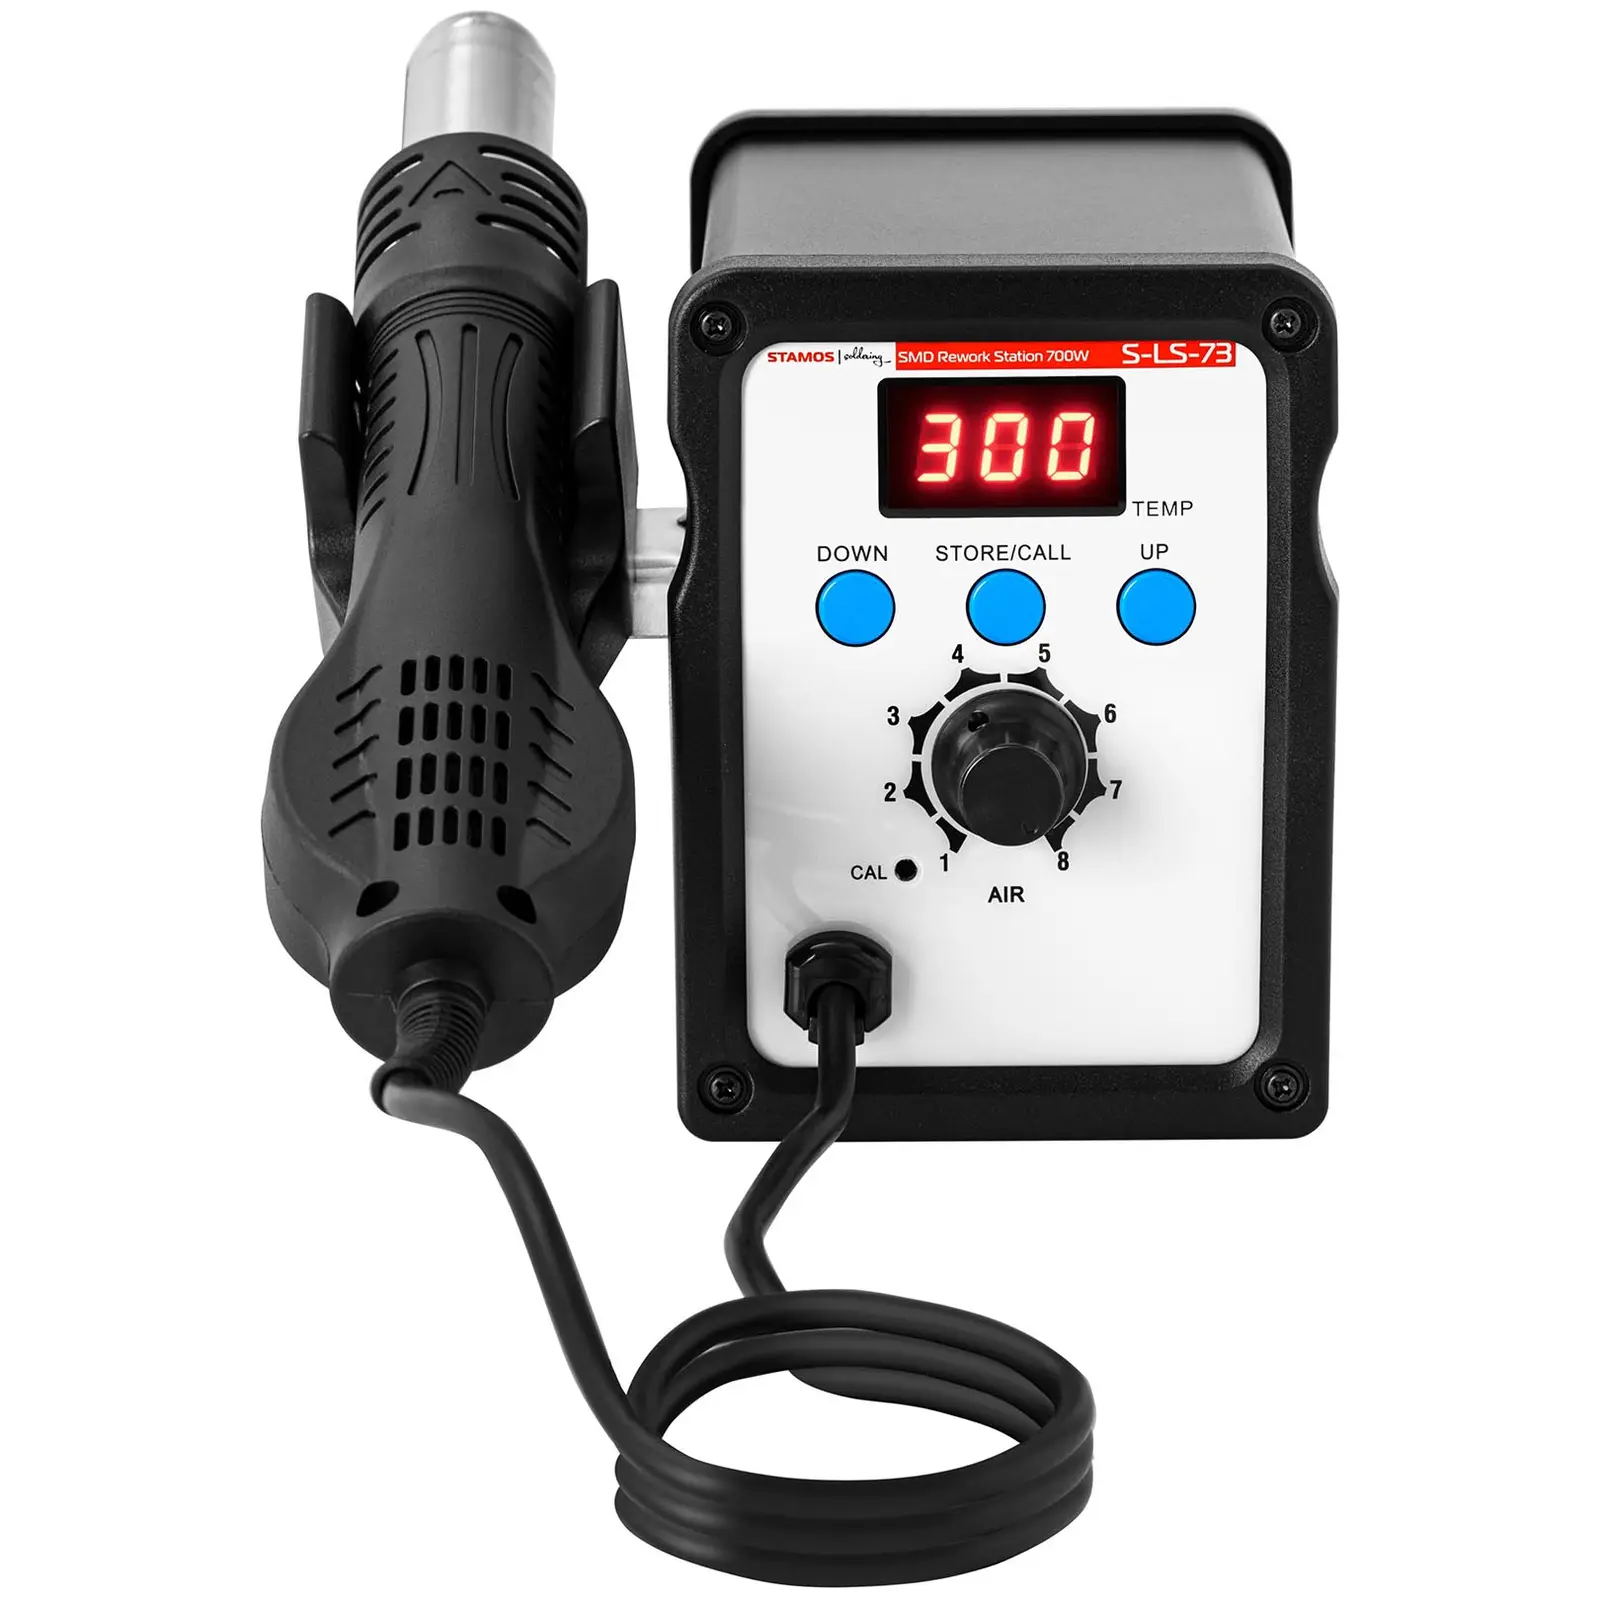 Soldering Station - with hot air gun - 700 W - LED display